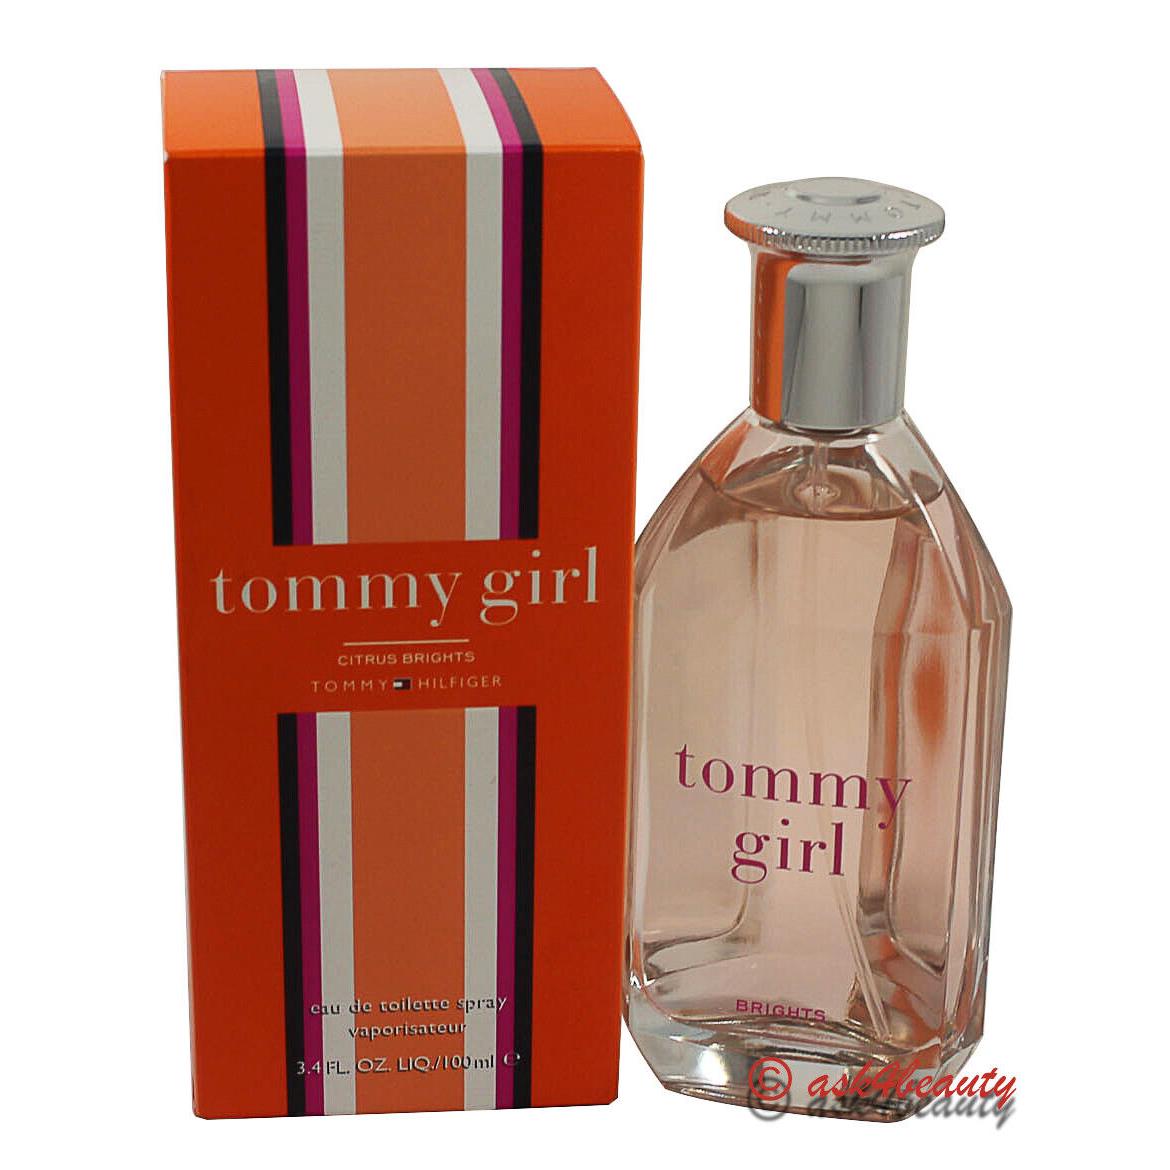 Tommy Girl Citrus Brights For Women 3.4 oz Edt Spray